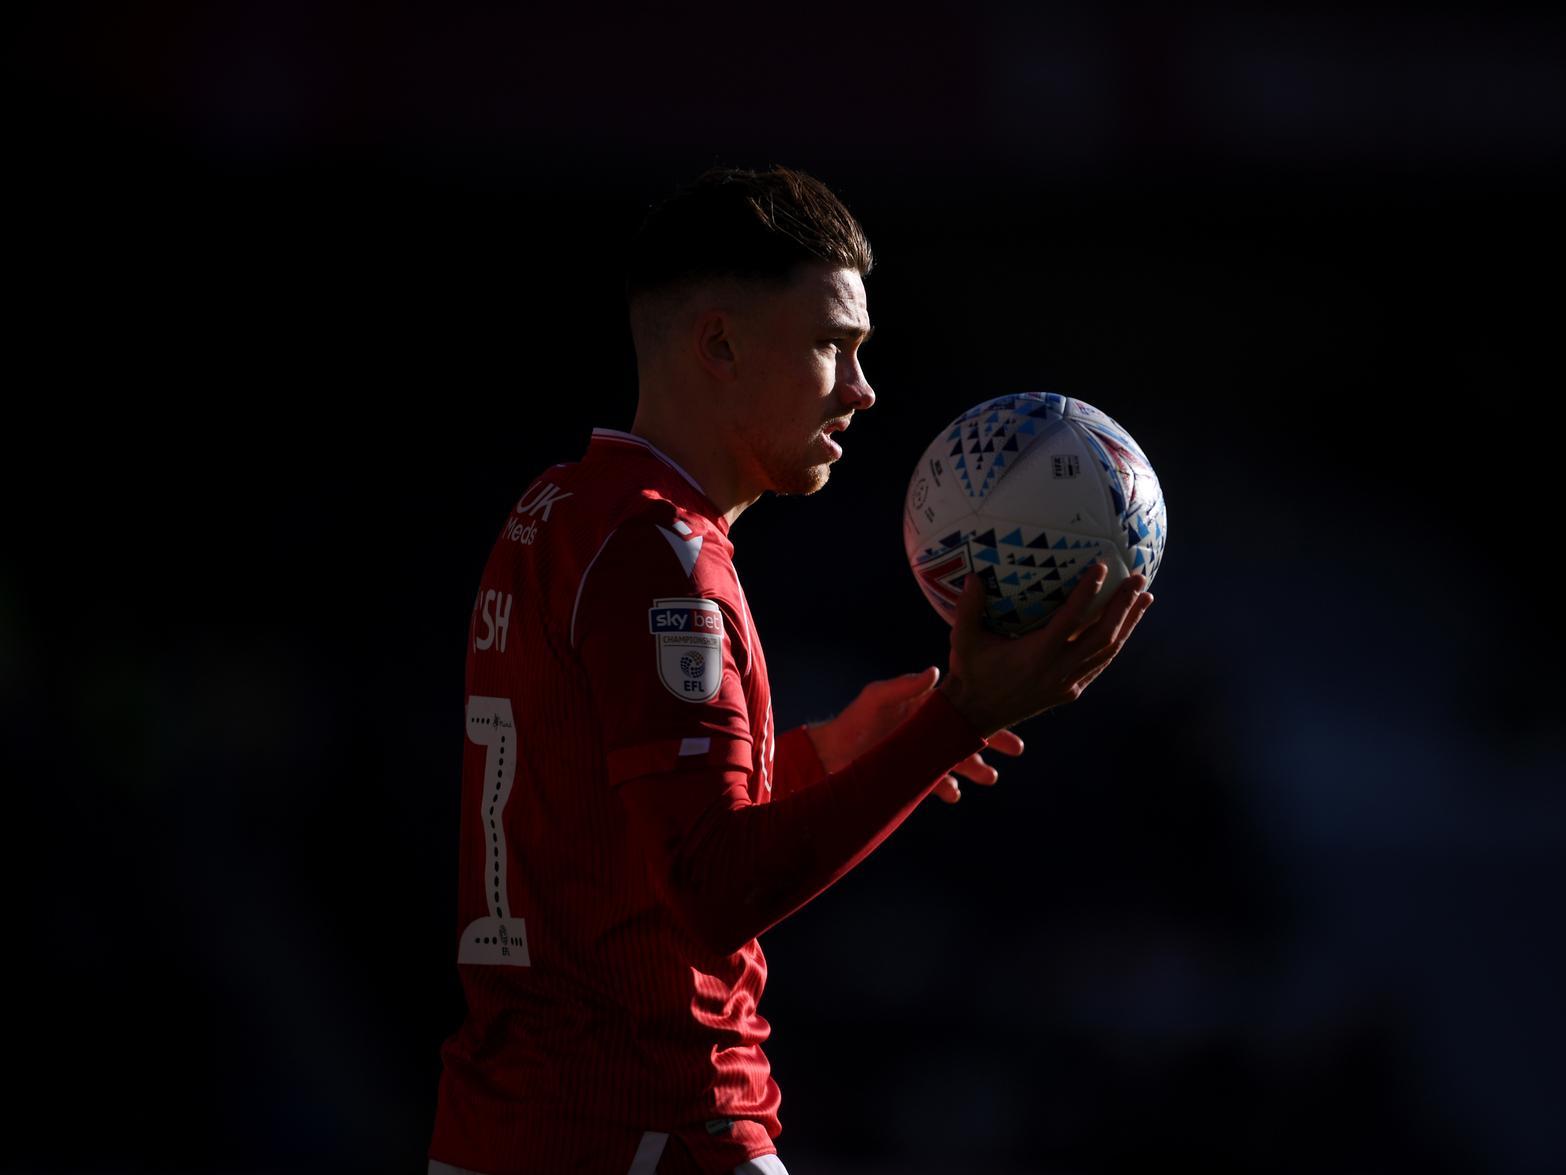 While he may not be the most high-profile player on the list, there's a lot of top tier interest in the Championship star. West Ham United are after him (as with most players!) but Brighton could rival them for the 22-year-old.